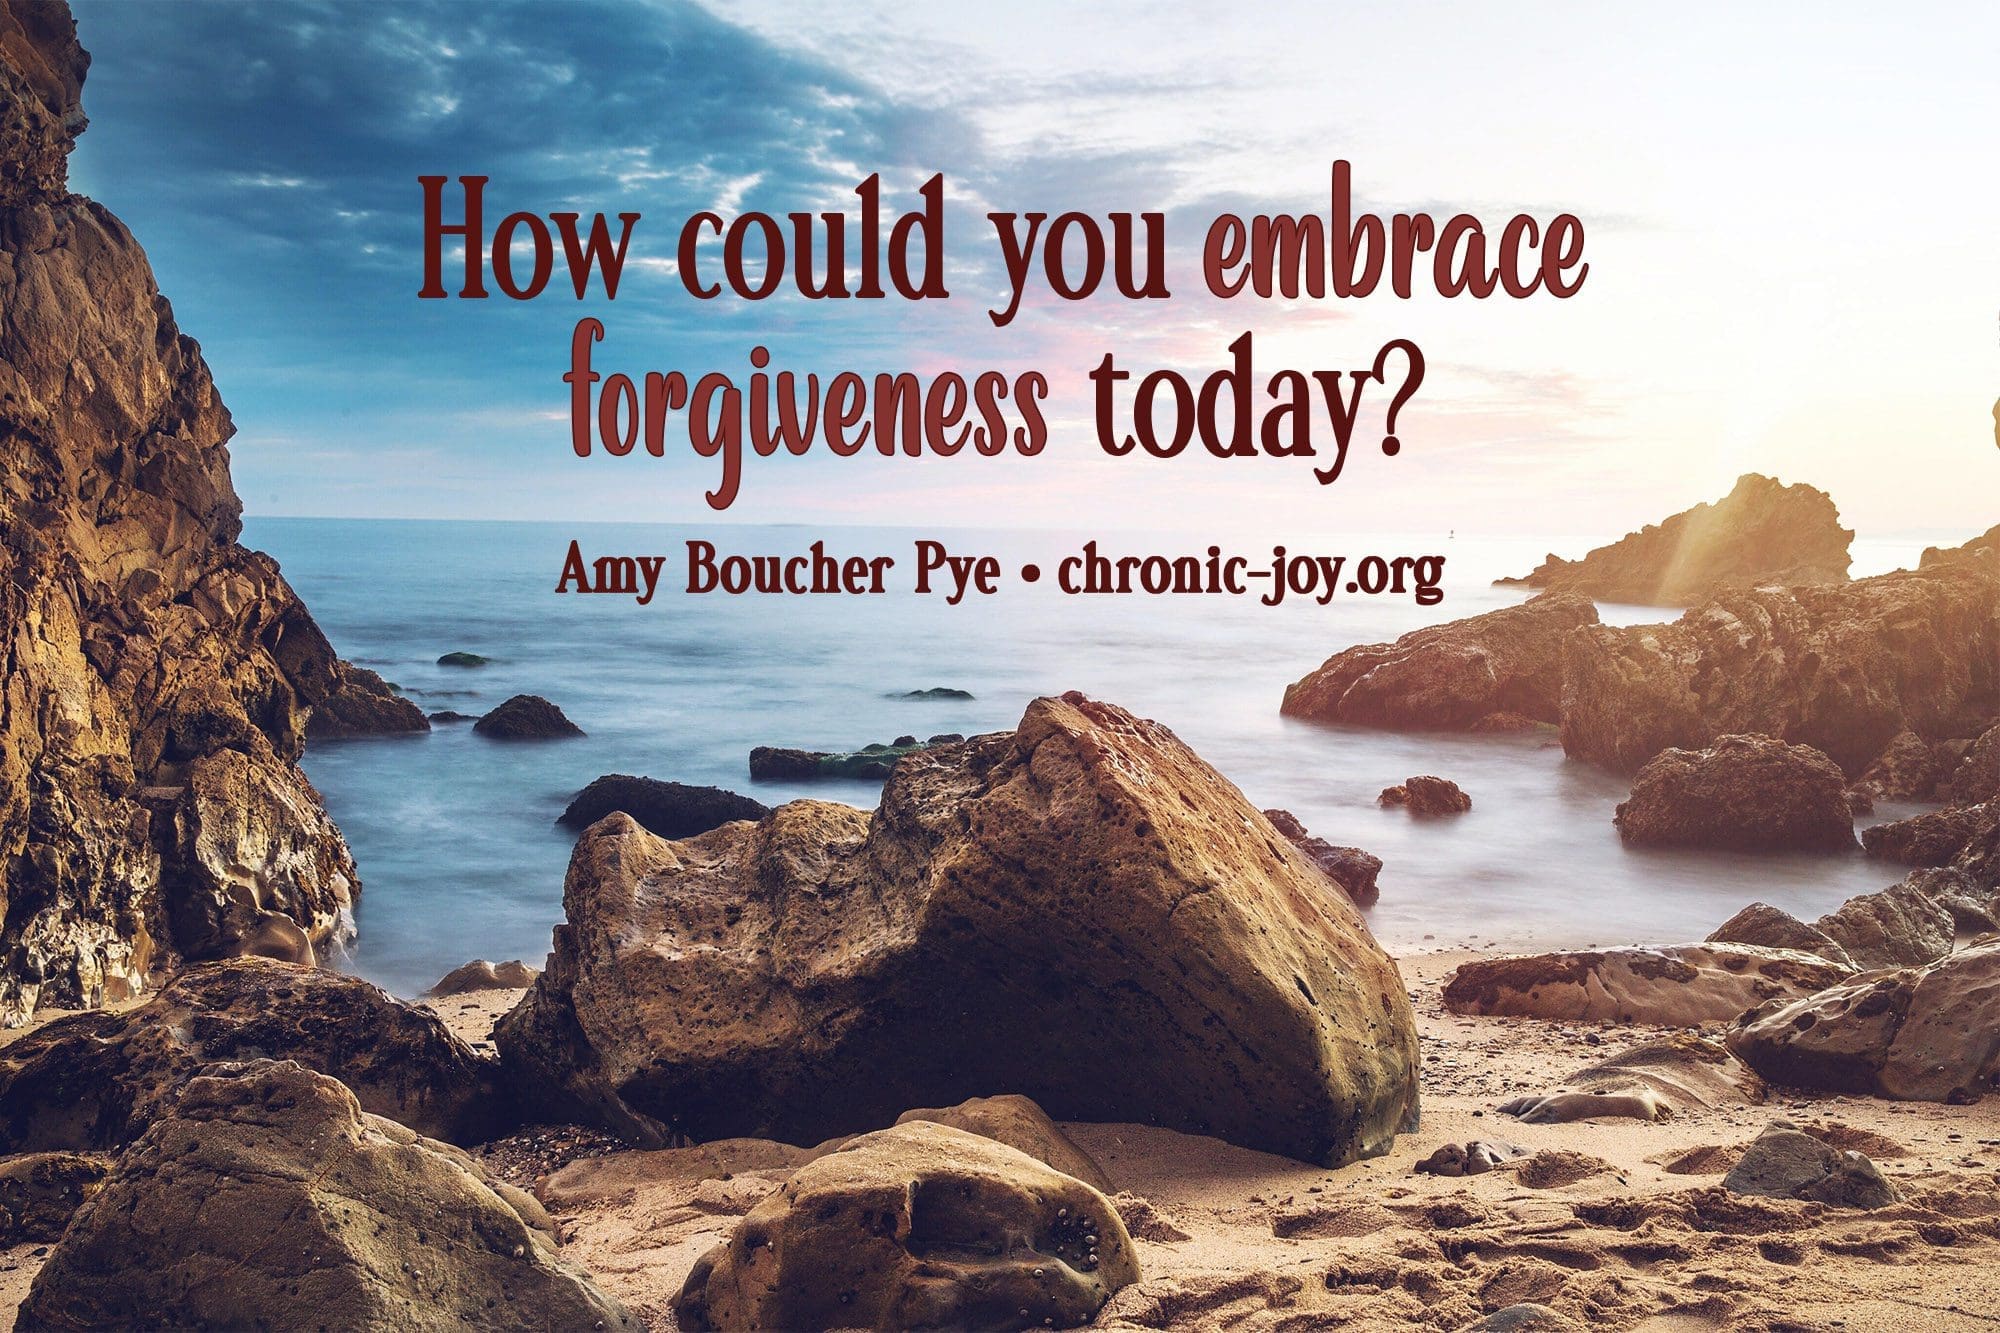 "How could you embrace forgiveness today?" Amy Boucher Pye